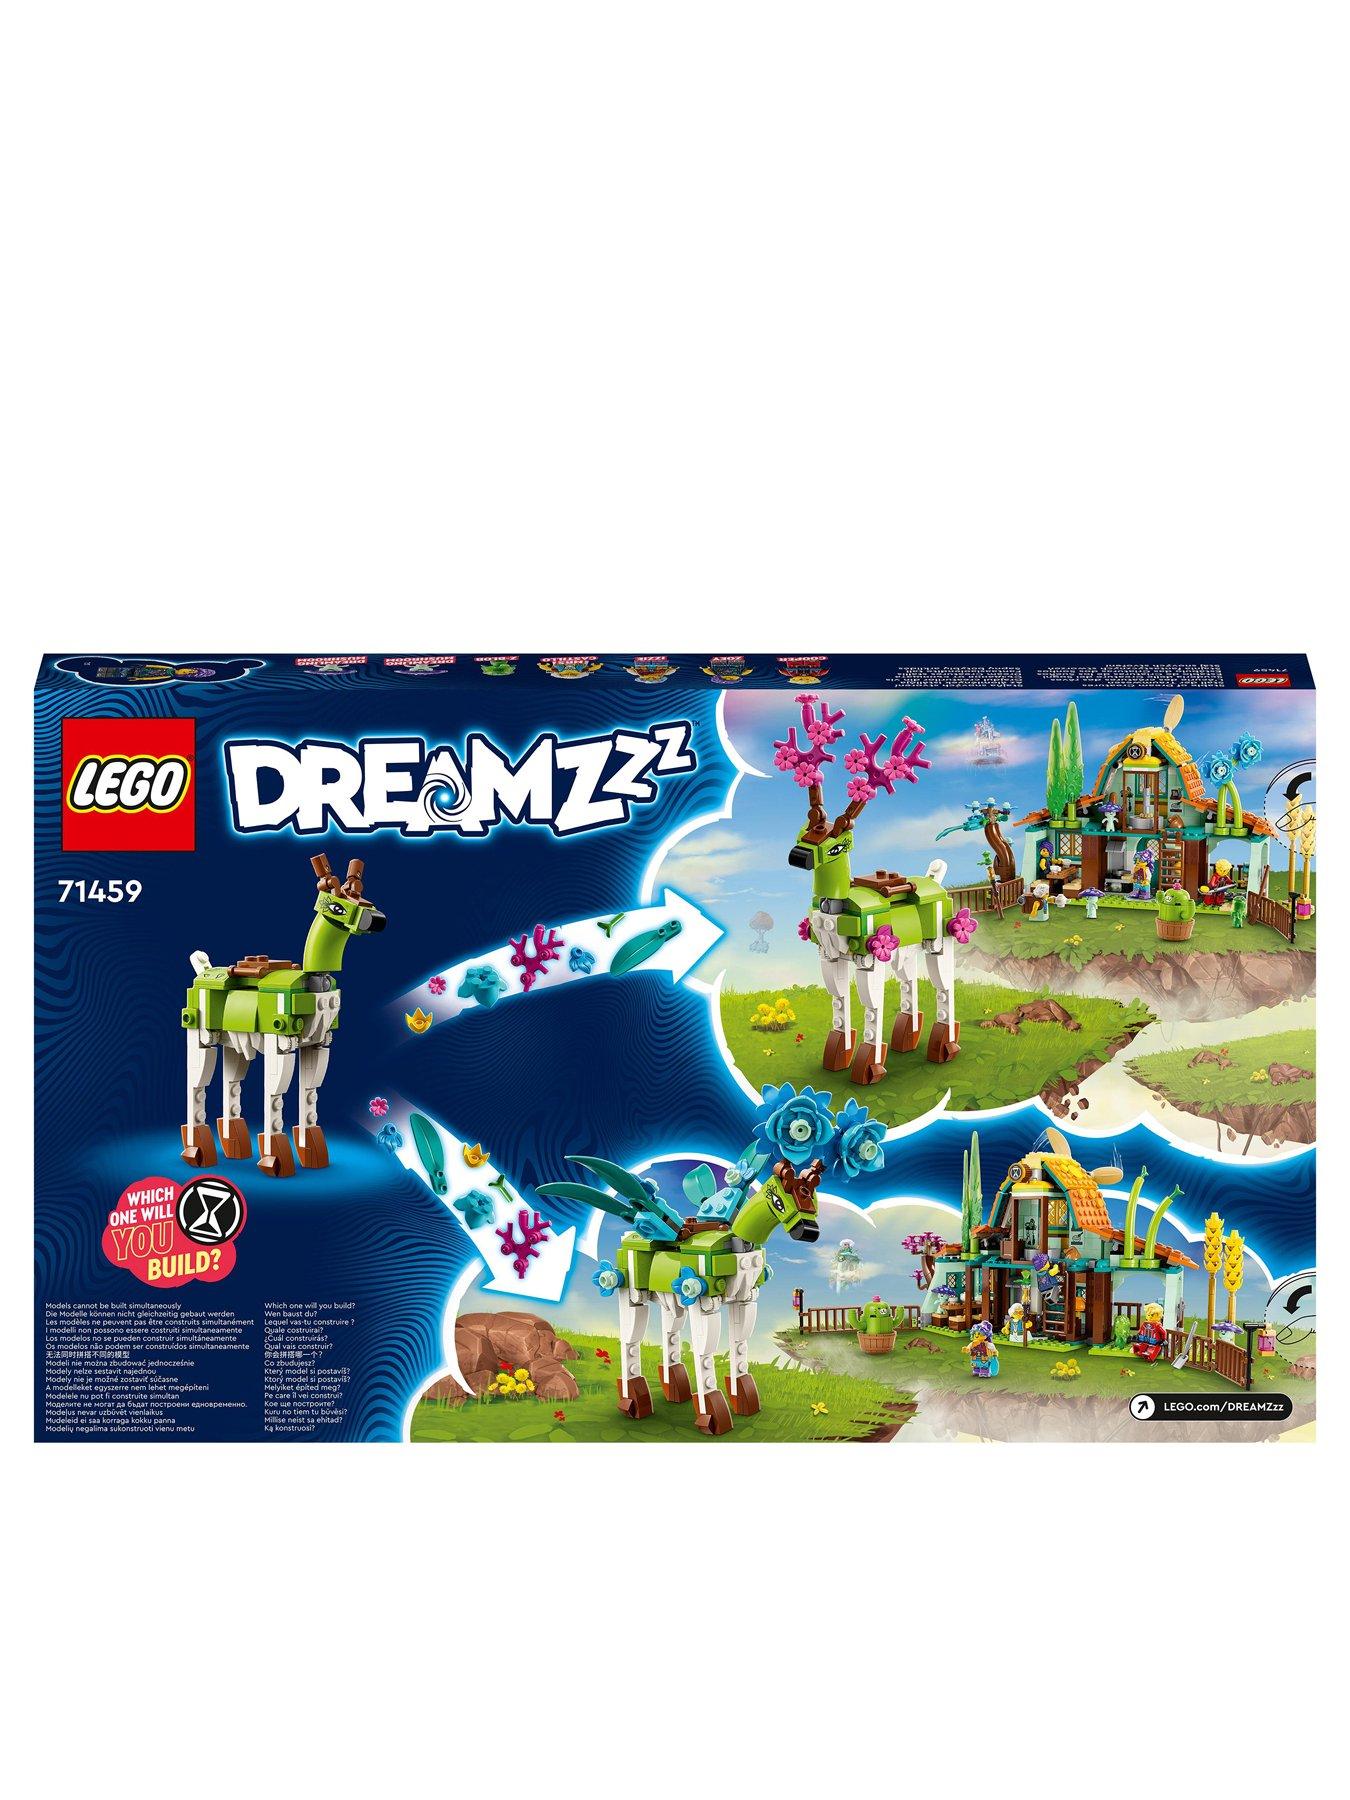 LEGO DreamZzz Stable of Dream Creatures Set 71459